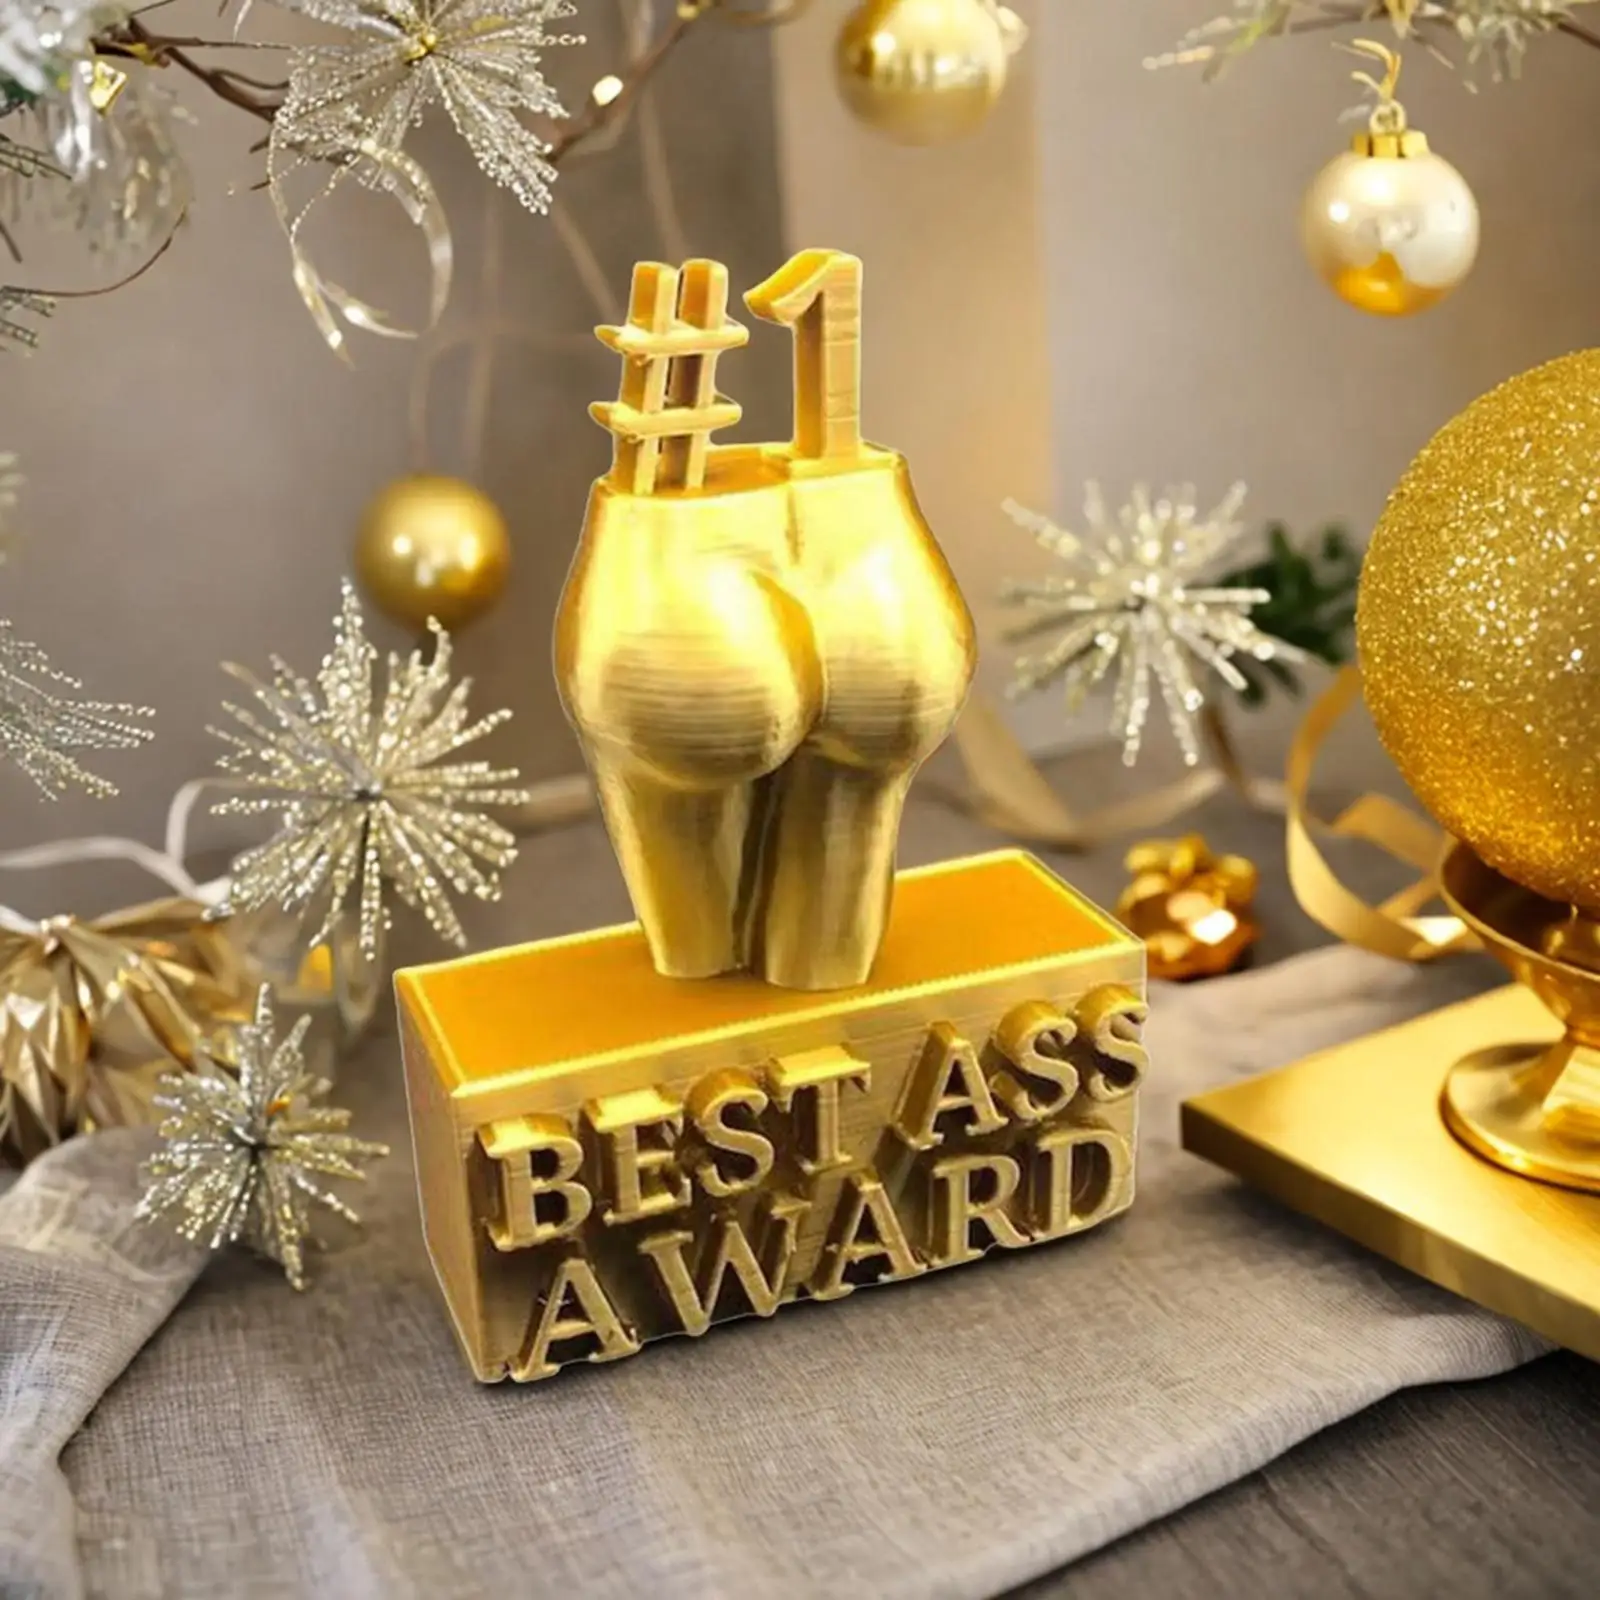 Best Ass Award Desktop Trophy Award Award Gift Creative Trophy for Competitions Celebrations Ceremonies Party Appreciation